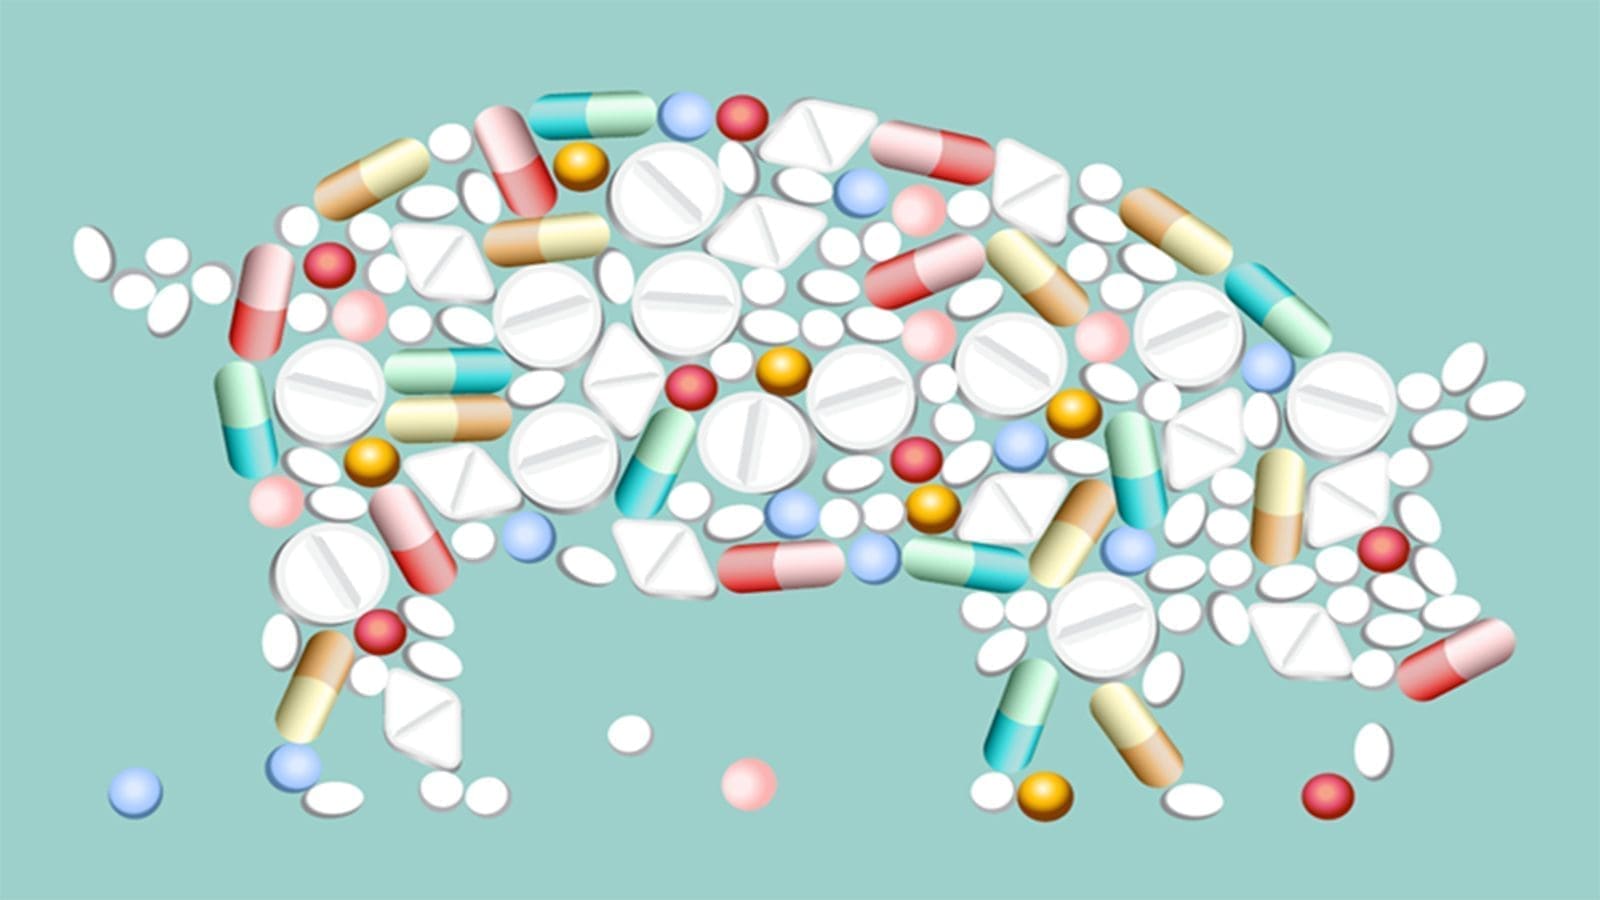 FDA develops guidance on food safety risk assessment for antimicrobials used in animals